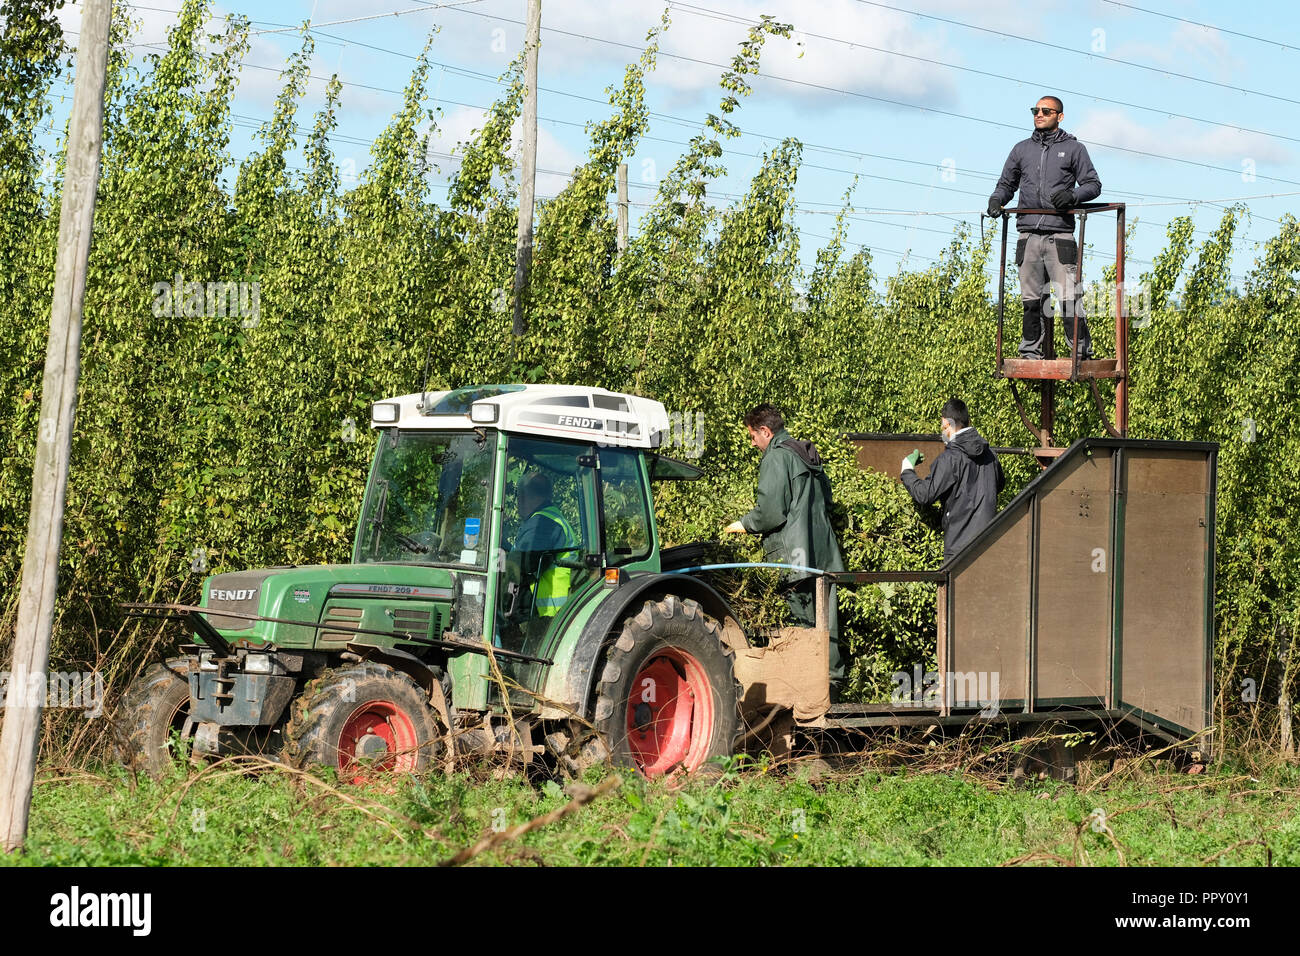 Stocks Farm, Suckley, Worcestershire - Friday 28th September 2018 -  EU seasonal workers from Poland and Bulgaria cutting hops ( Jester variety ) in the fine Autumn sunshine - after a long hot dry summer this years hop yield is down on previous years. Growers face uncertainty over next years labour force as Brexit negotiations continue. Photo Steven May / Alamy Live News Stock Photo